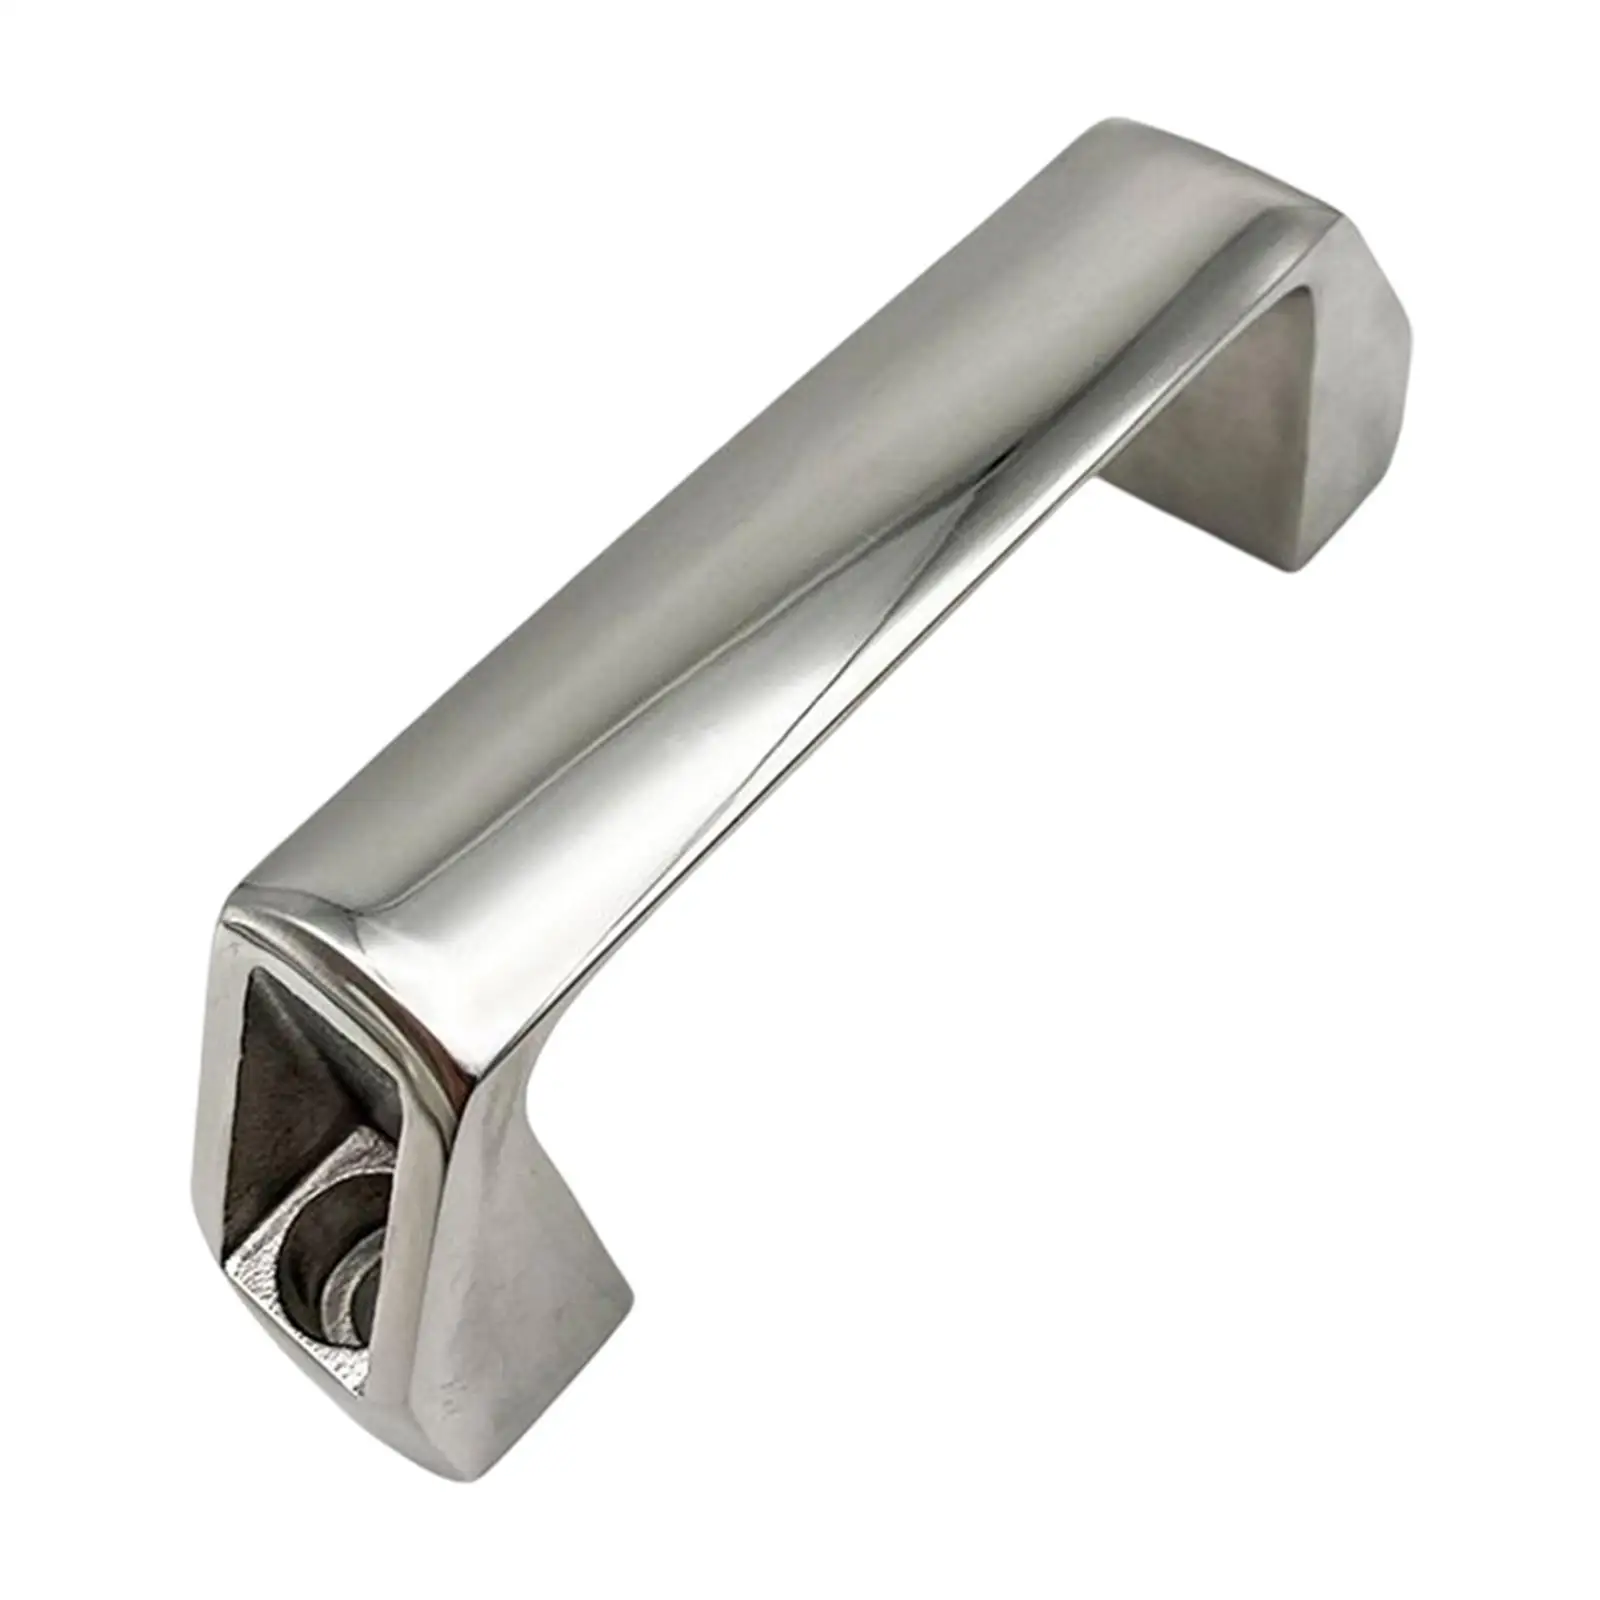 Marine Grab Handle Accessories 304 Stainless Steel Multipurpose Handrail Fits for